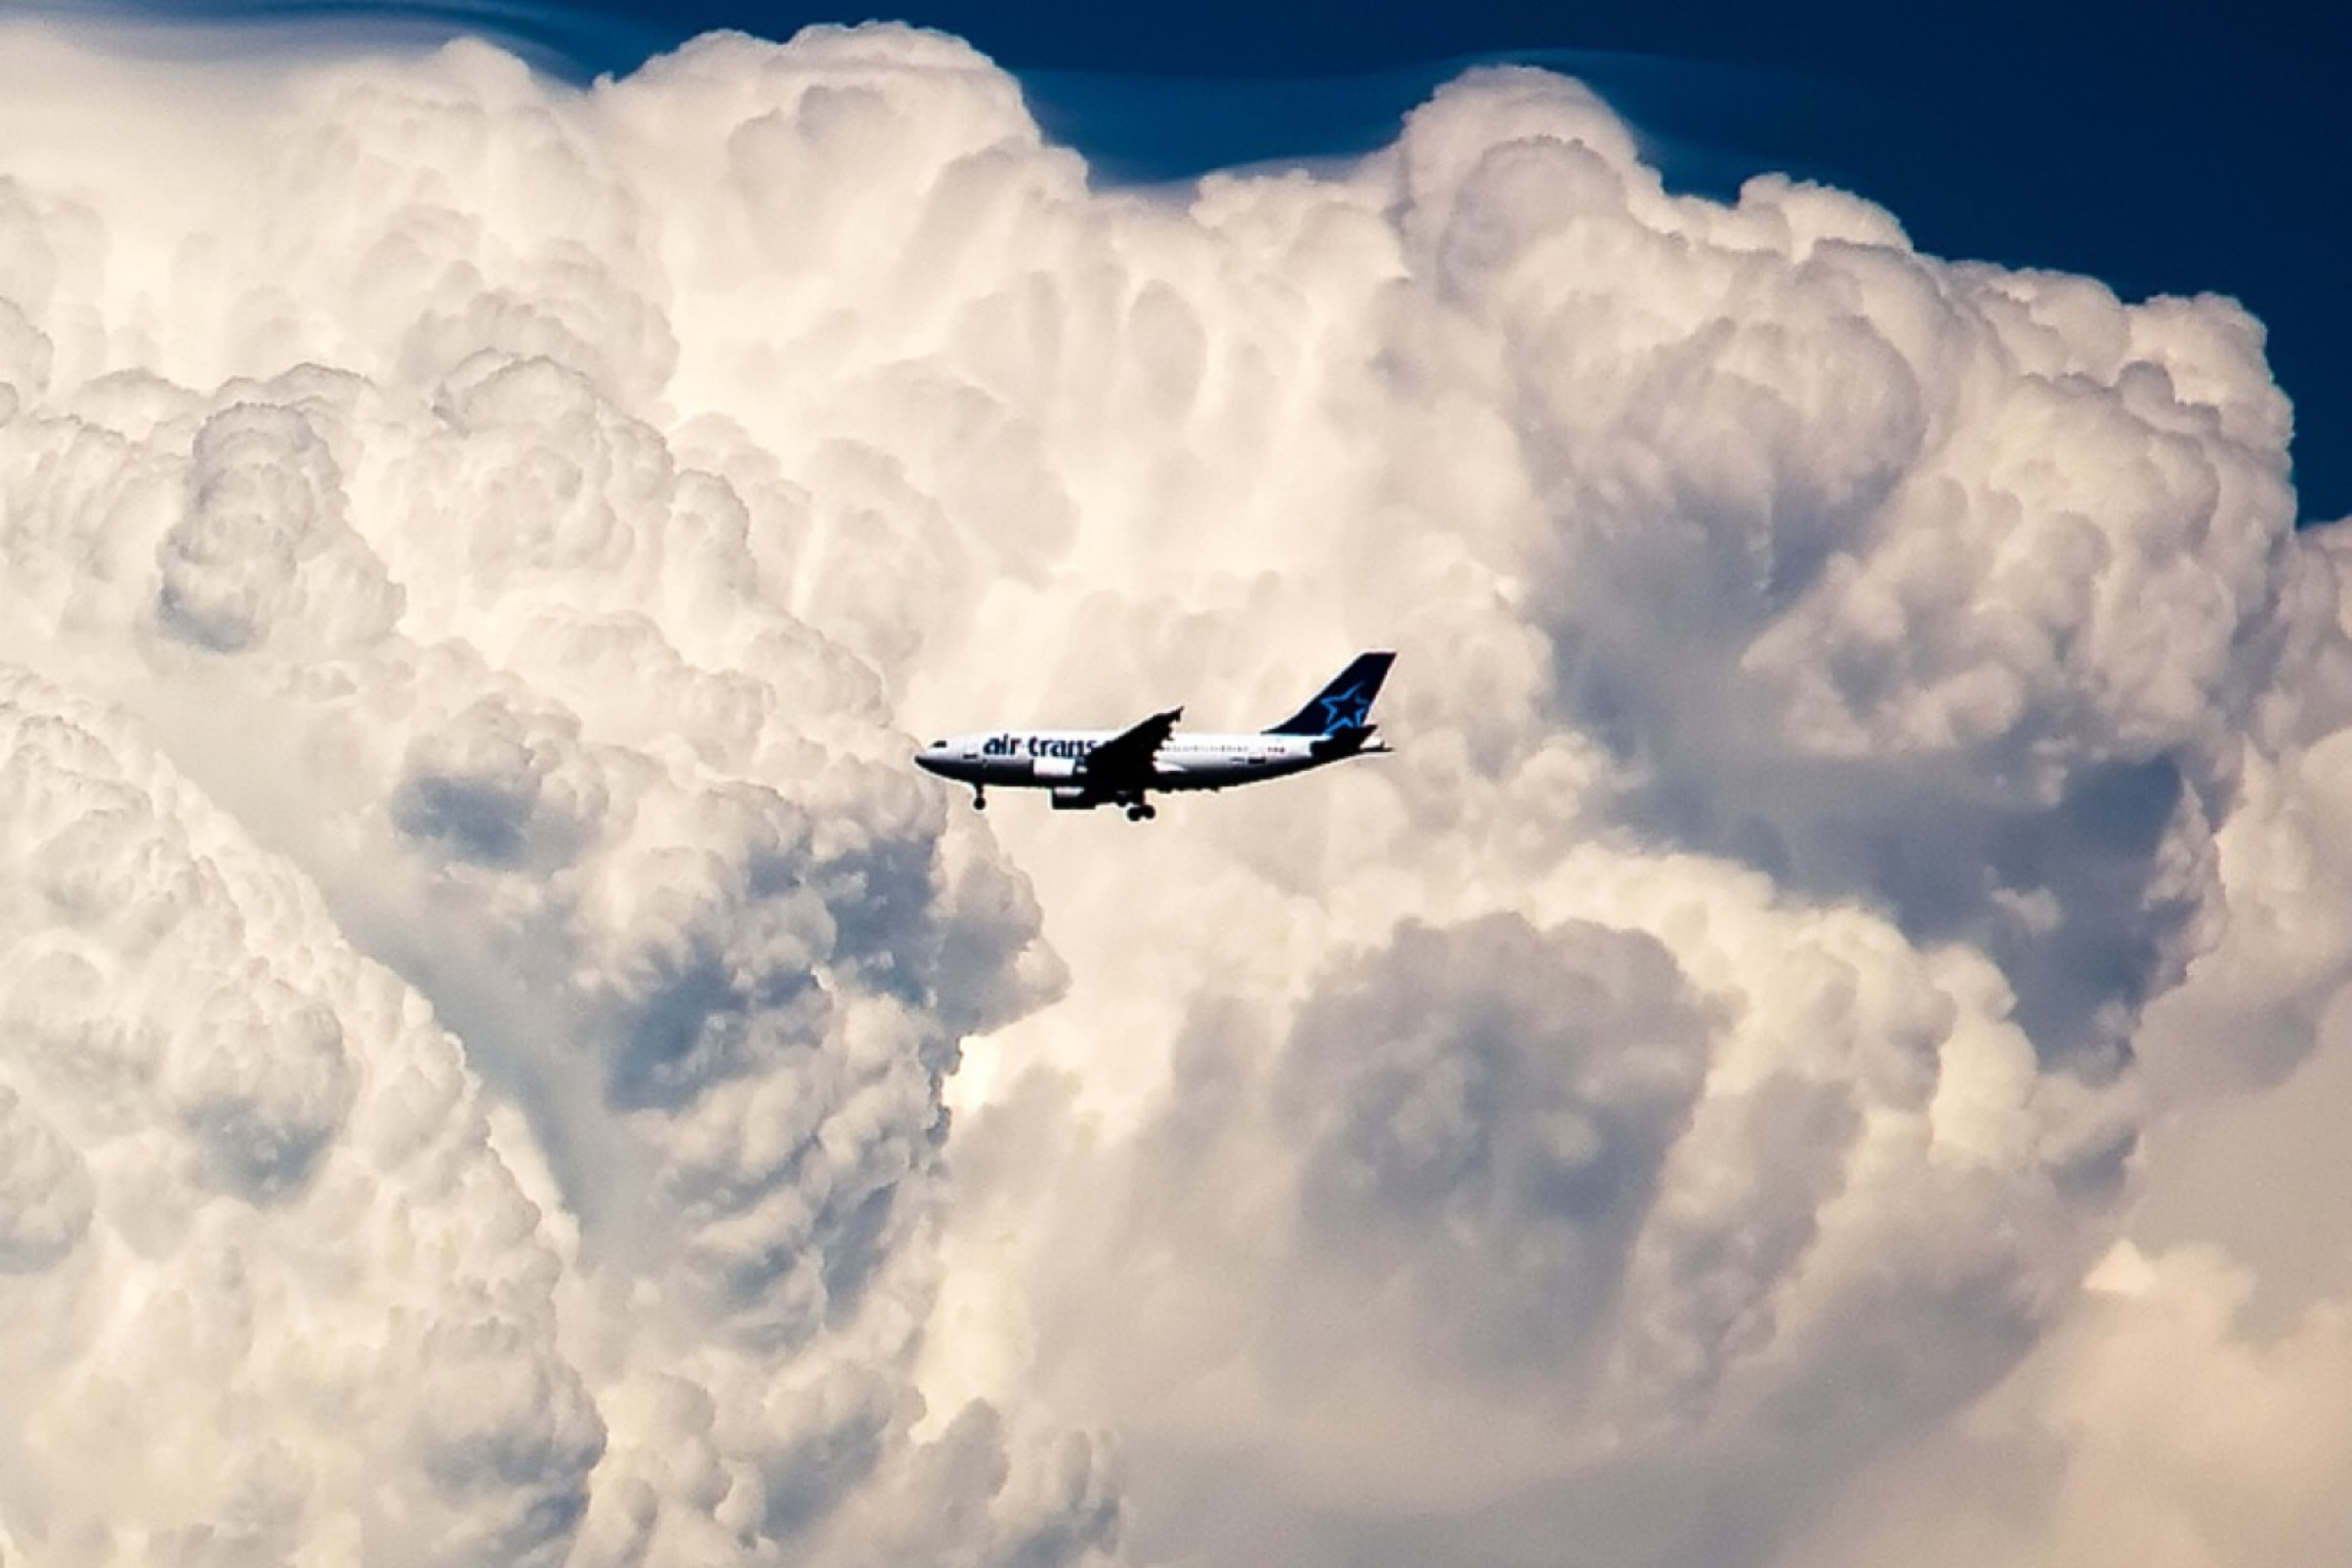 Обои Plane In The Clouds 2880x1920